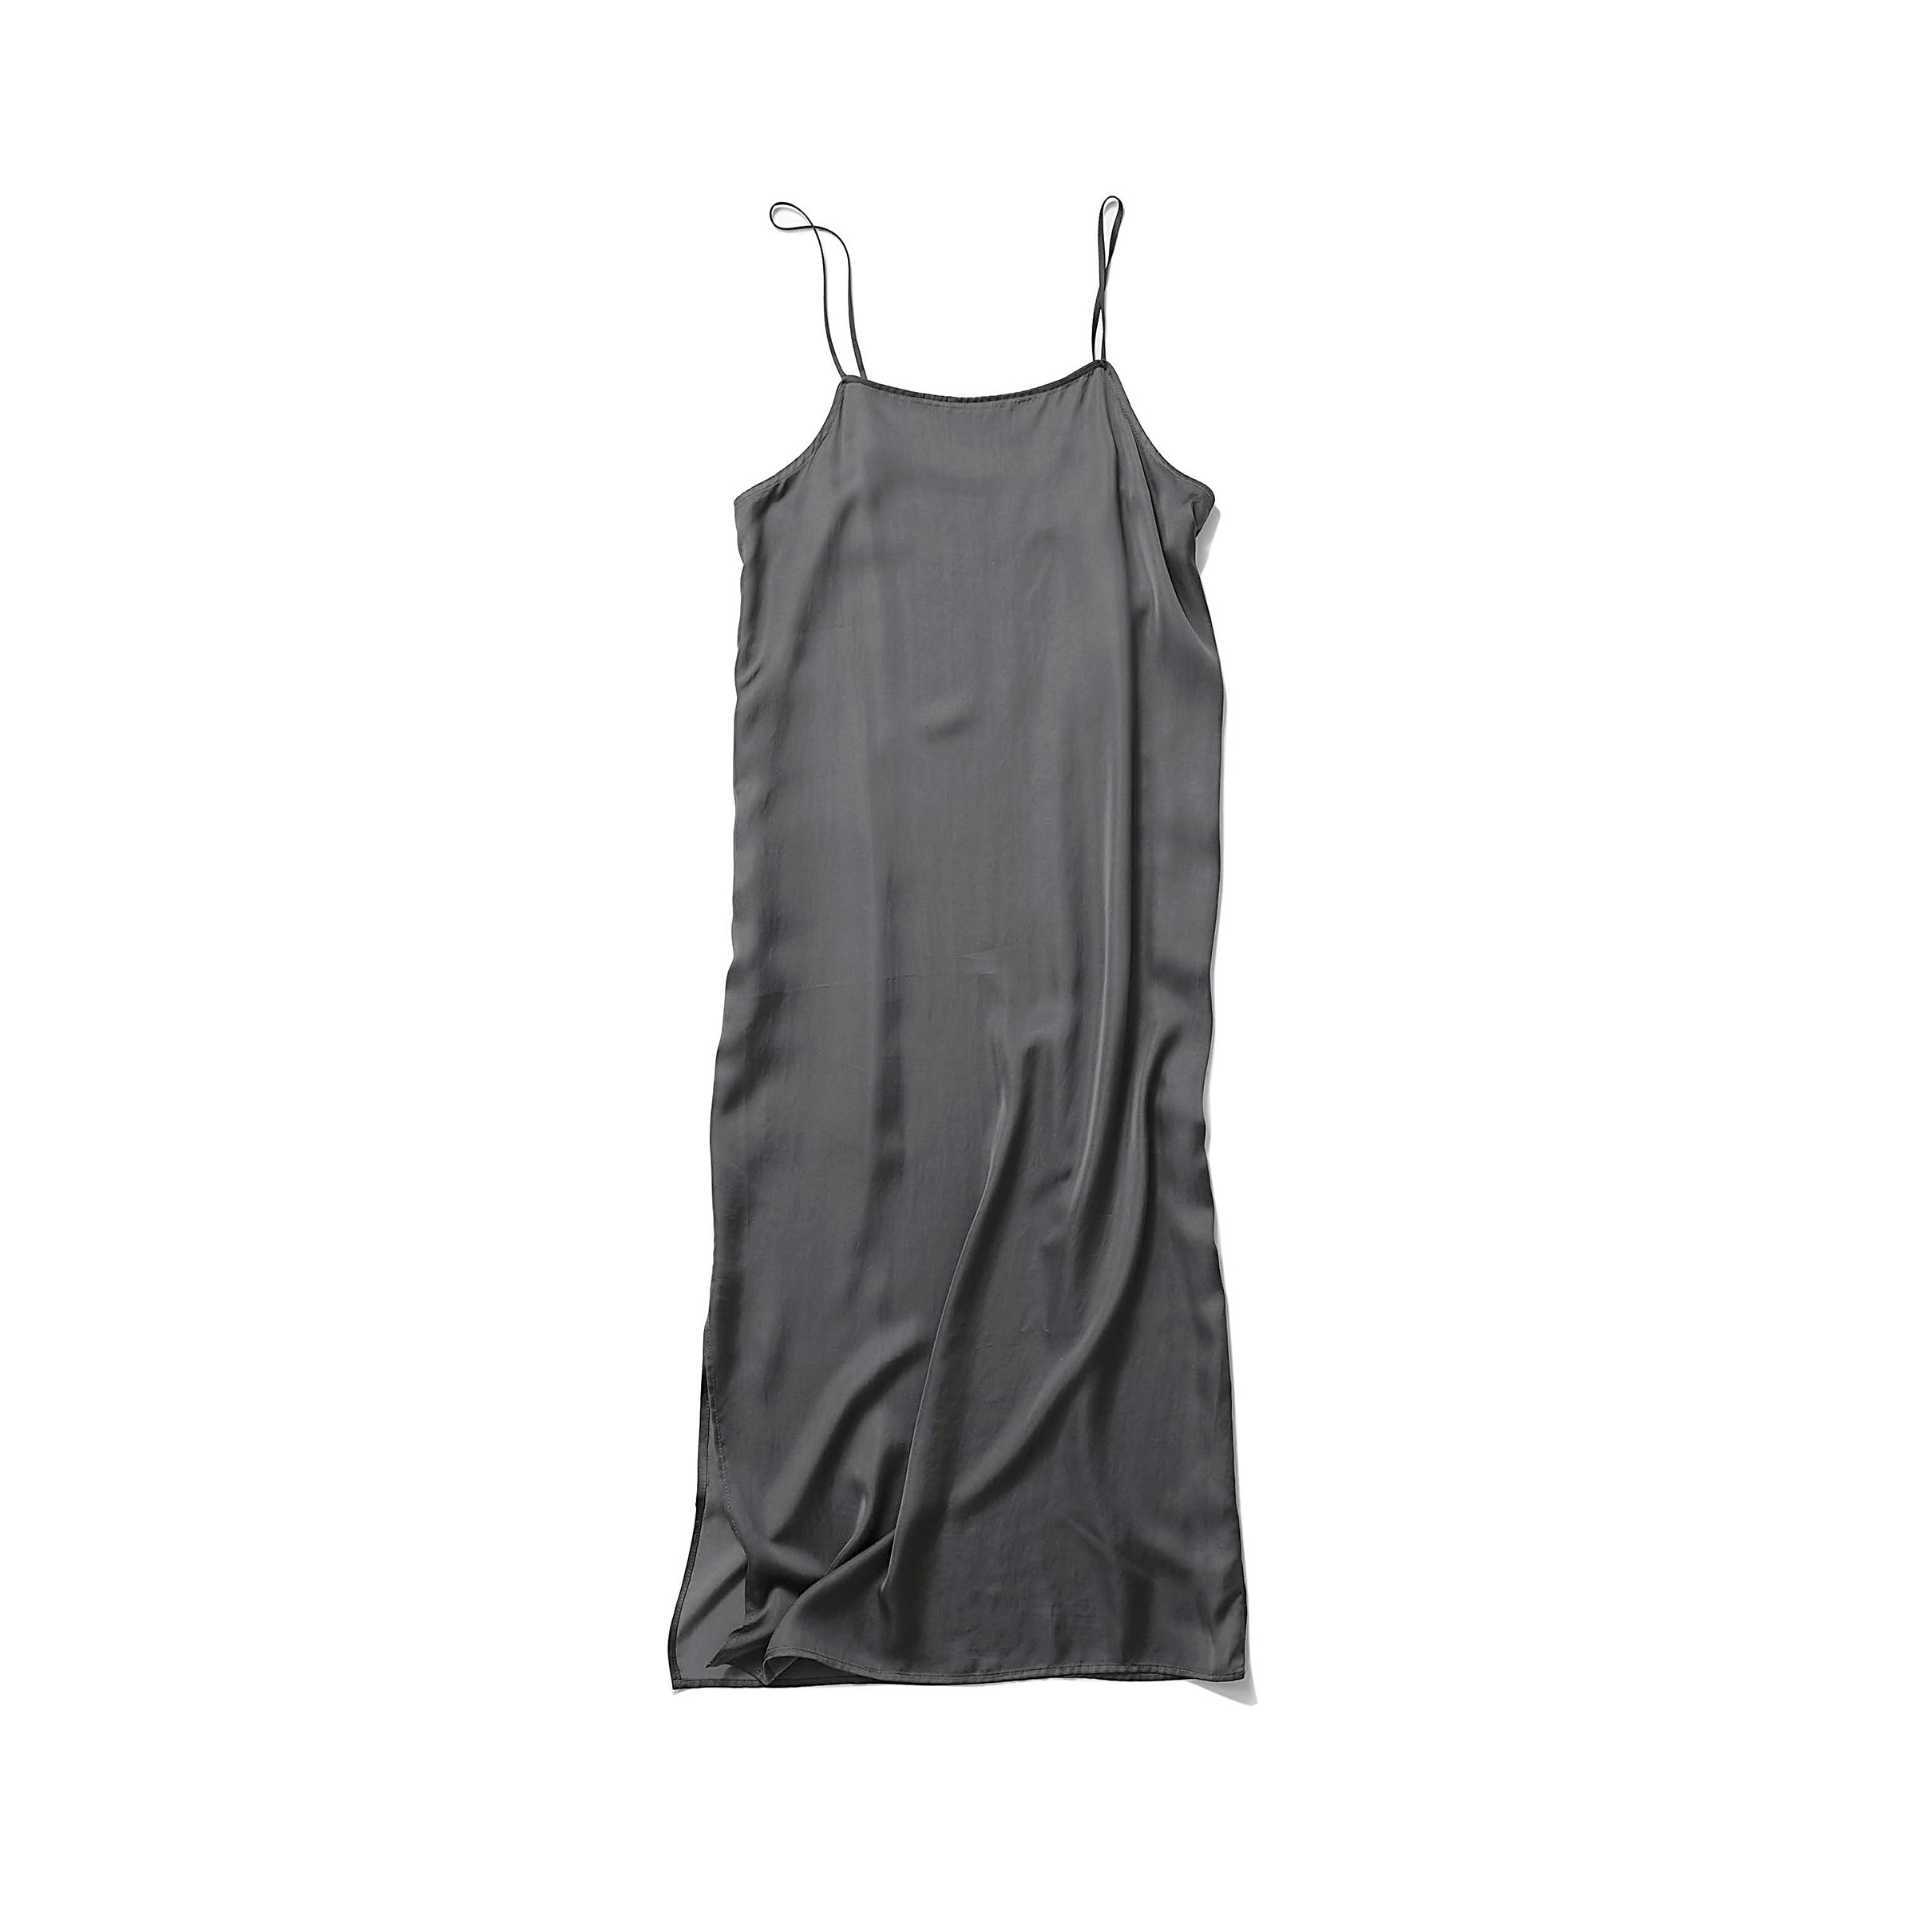 satin camisole dress @ chacoal